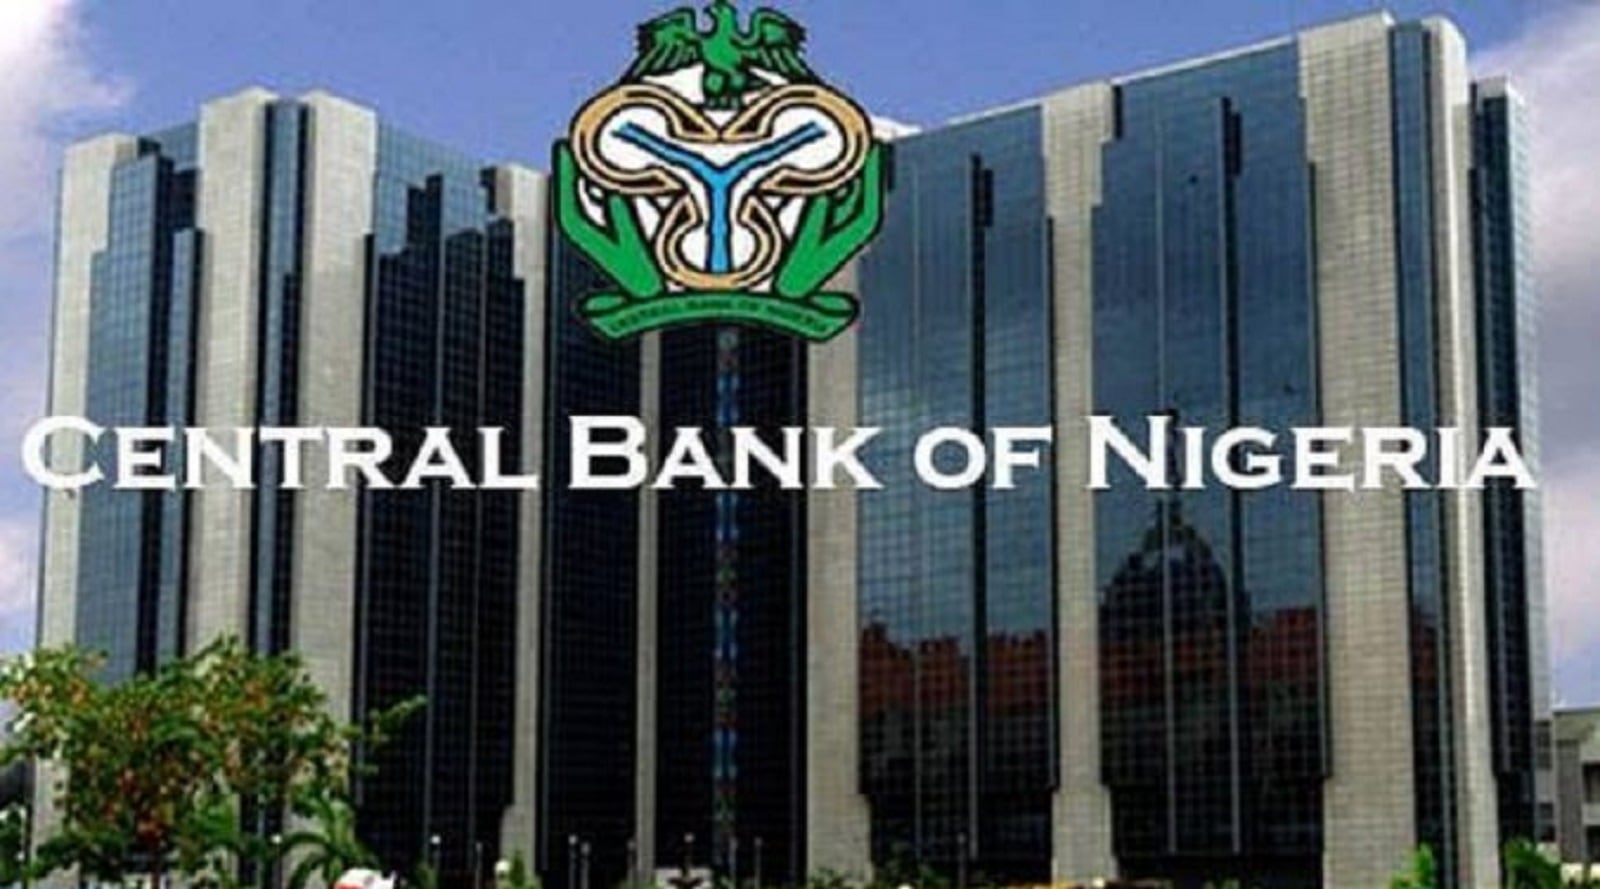 The Central Bank of Nigeria website was not hacked. This is what we think  happened - TechCity